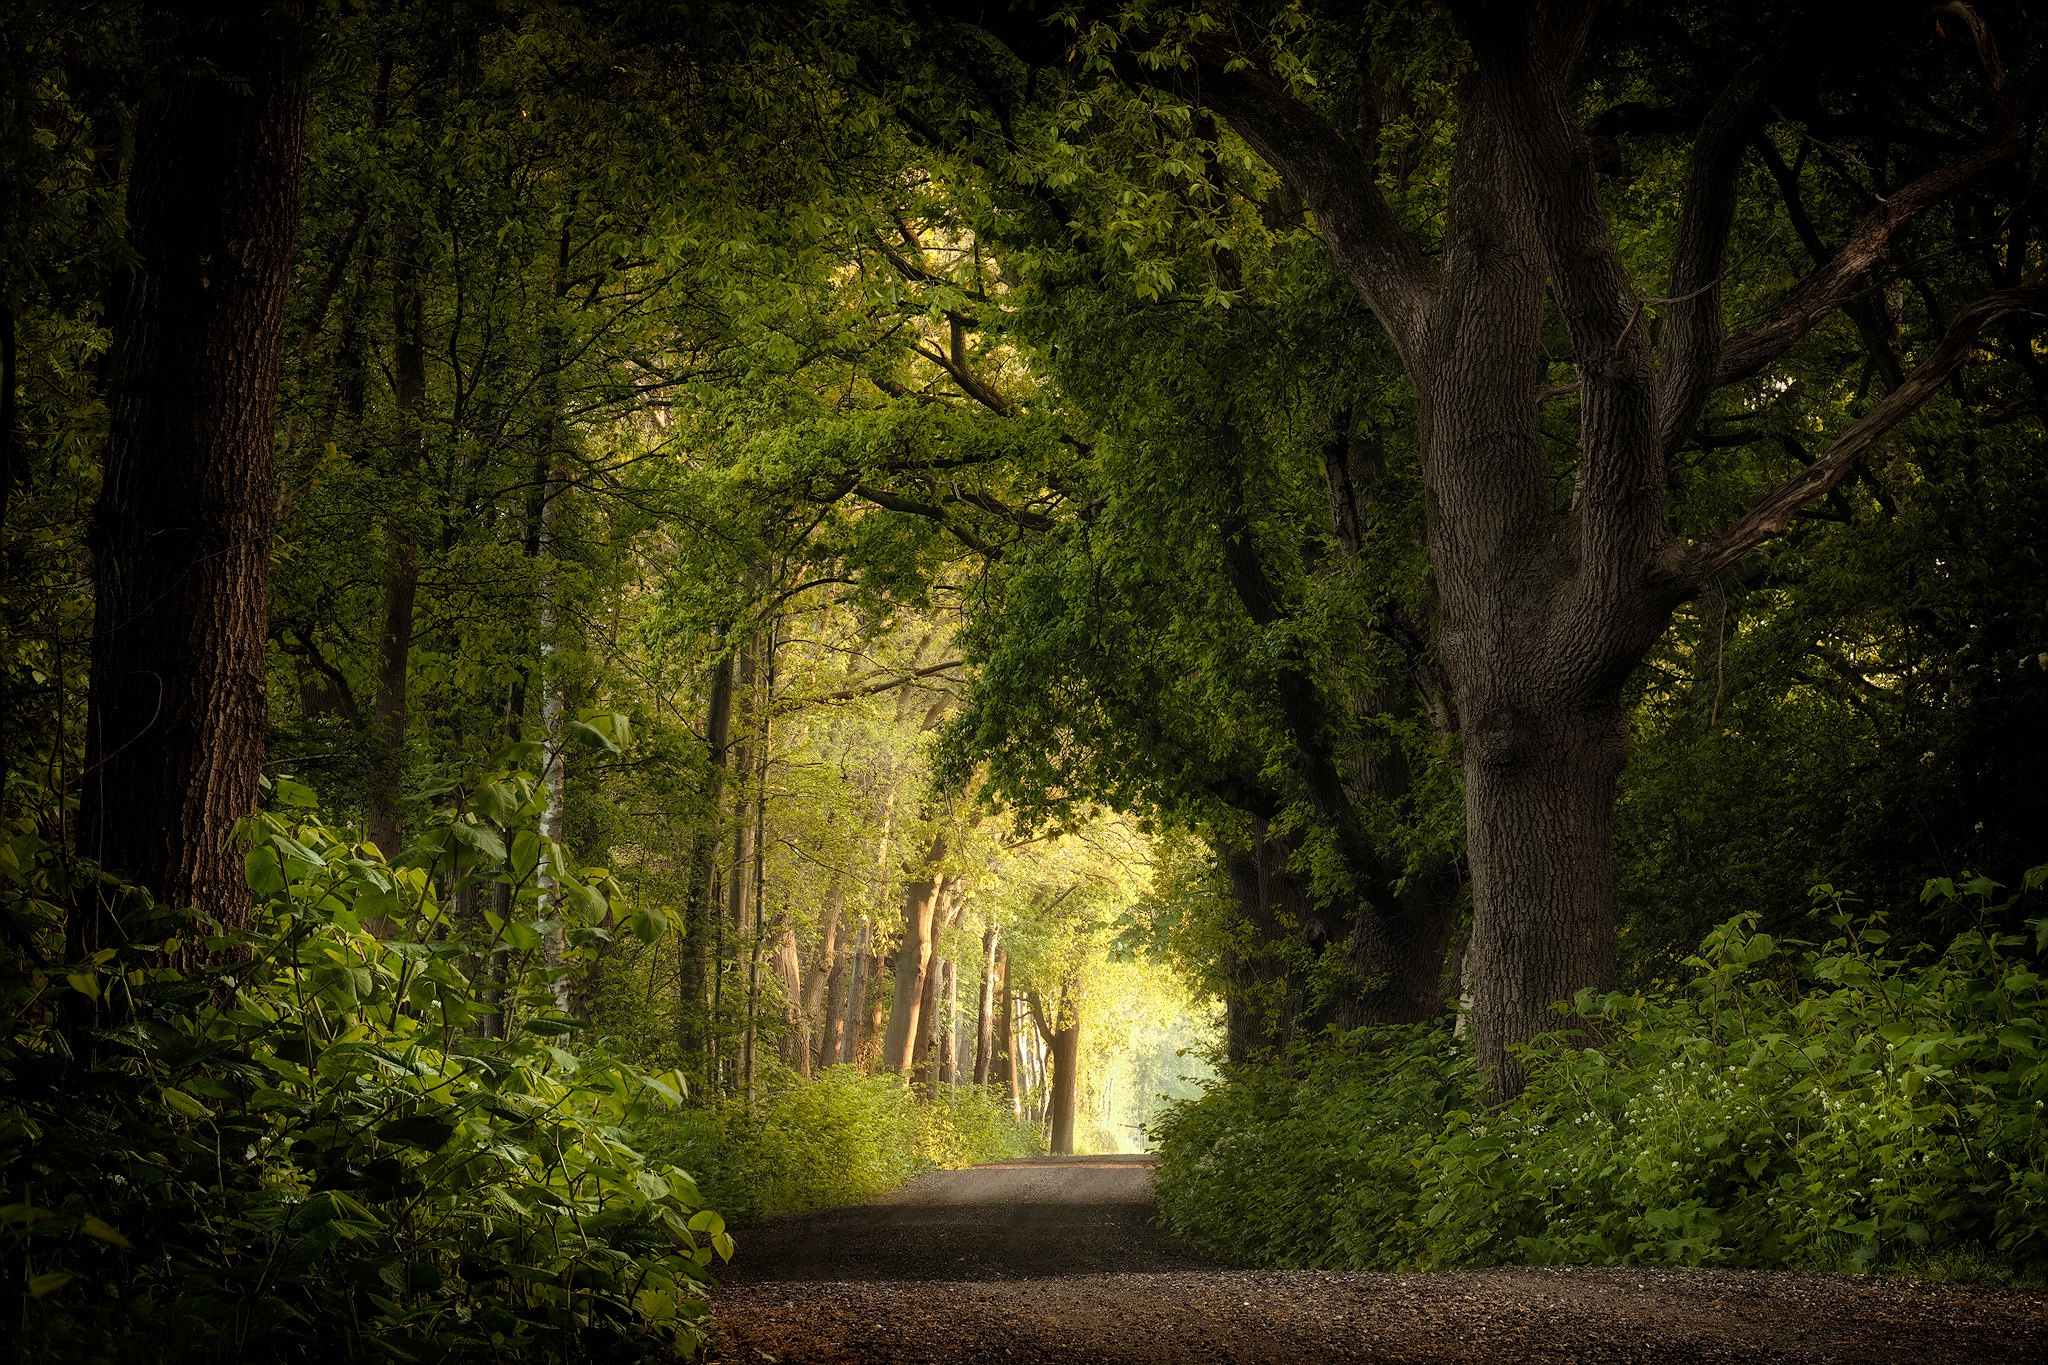 General 2048x1365 Netherlands nature trees plants outdoors road dirt road old tree forest gravel